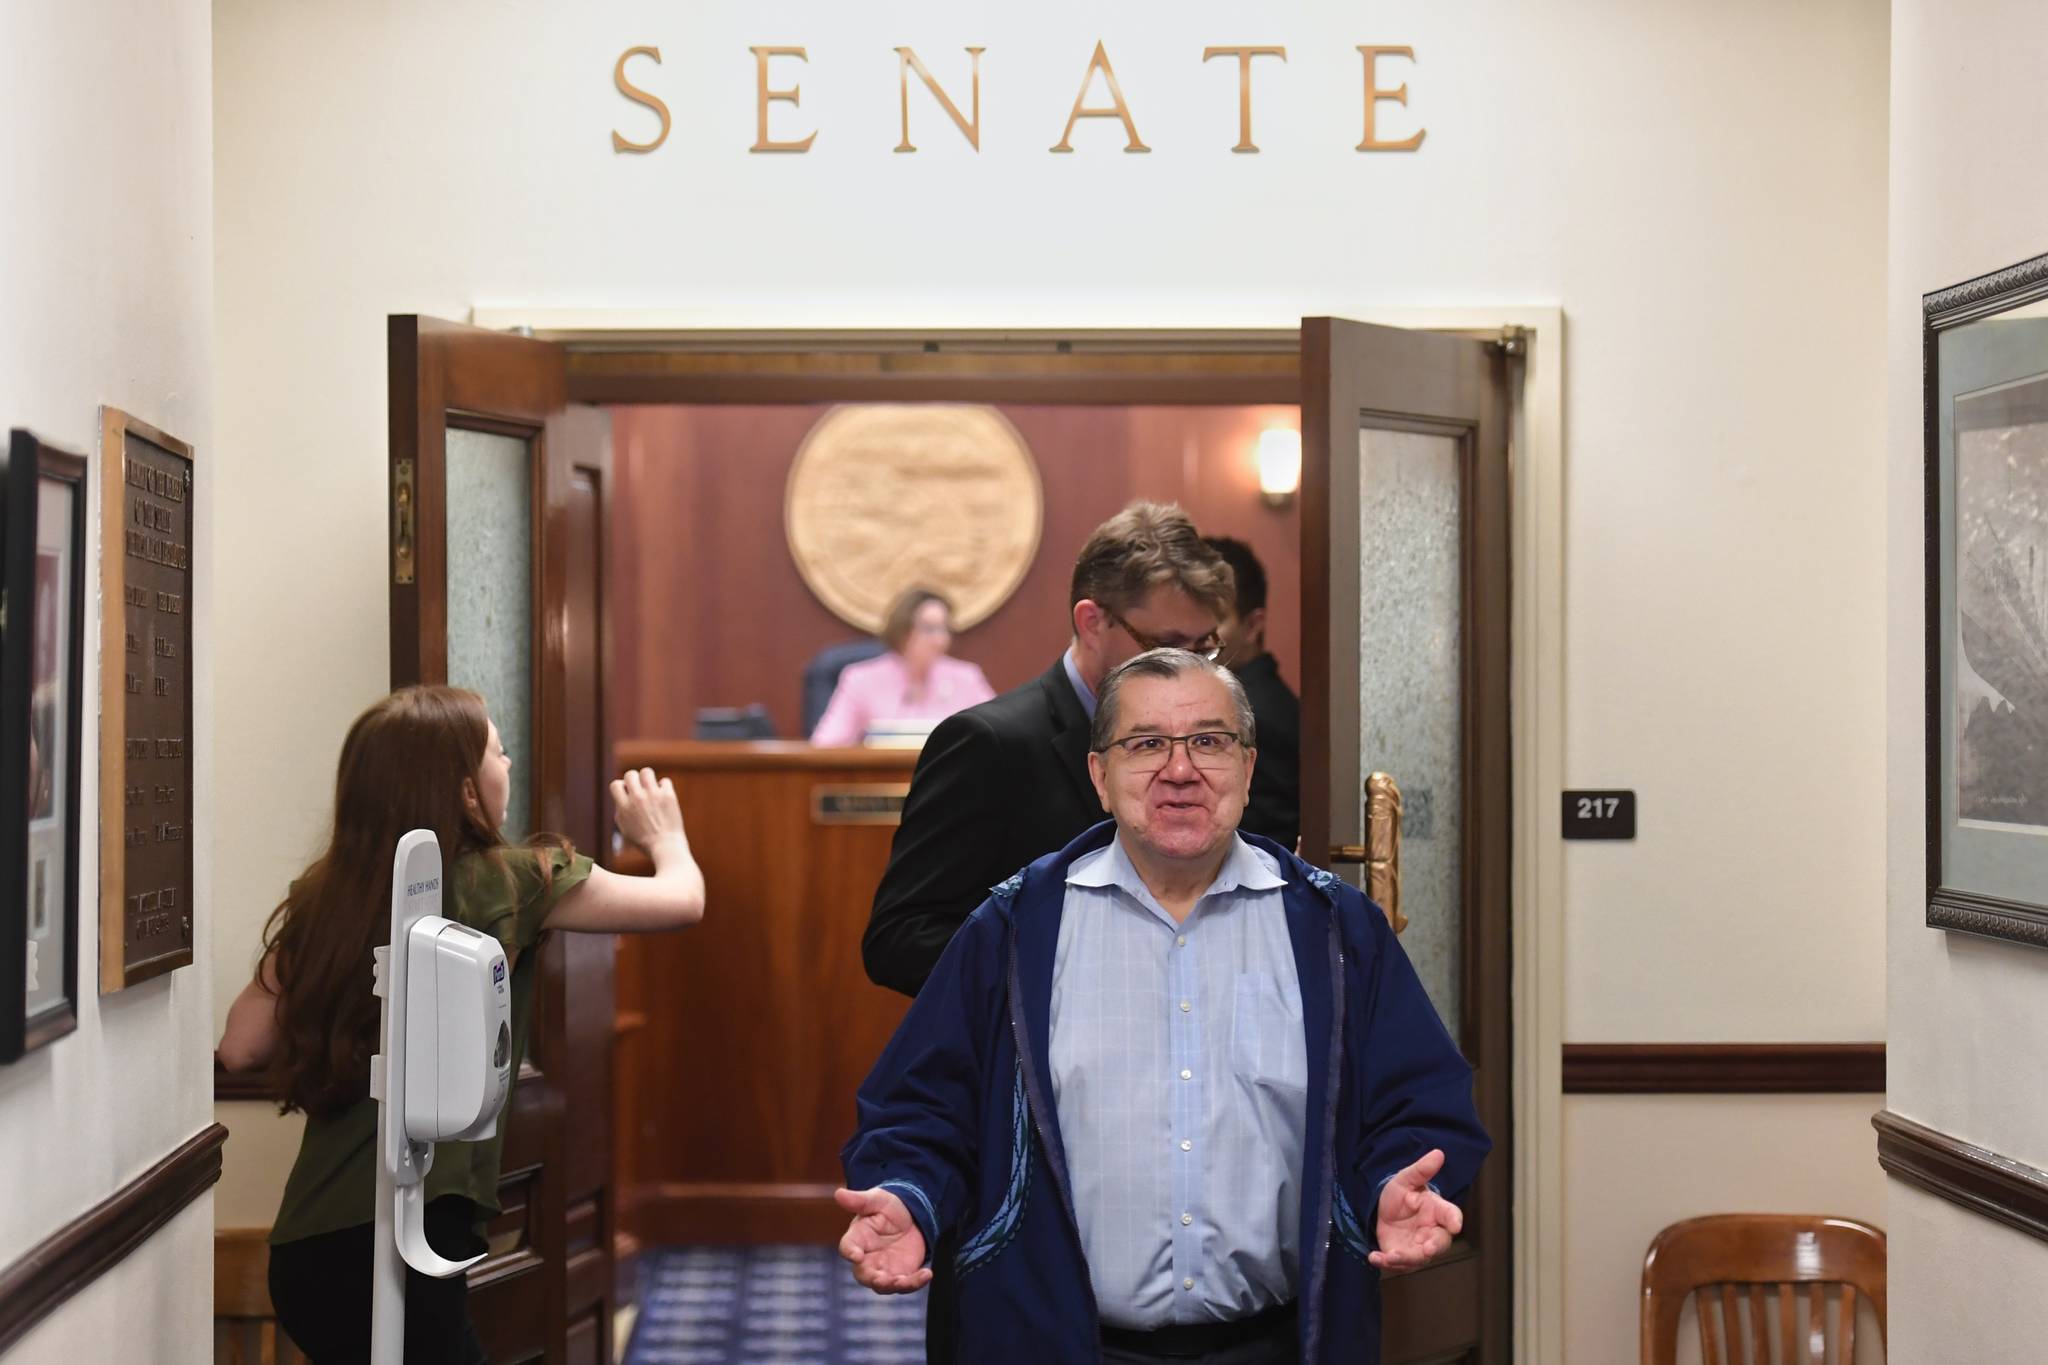 Sen. Lyman Hoffman, D-Bethel, leaves the Senate chambers after a “call” on the Senate was lifted on Thursday, June 6, 2019. Sen. Hoffman said, “Another fun day in the Senate” on his way out. (Michael Penn | Juneau Empire)